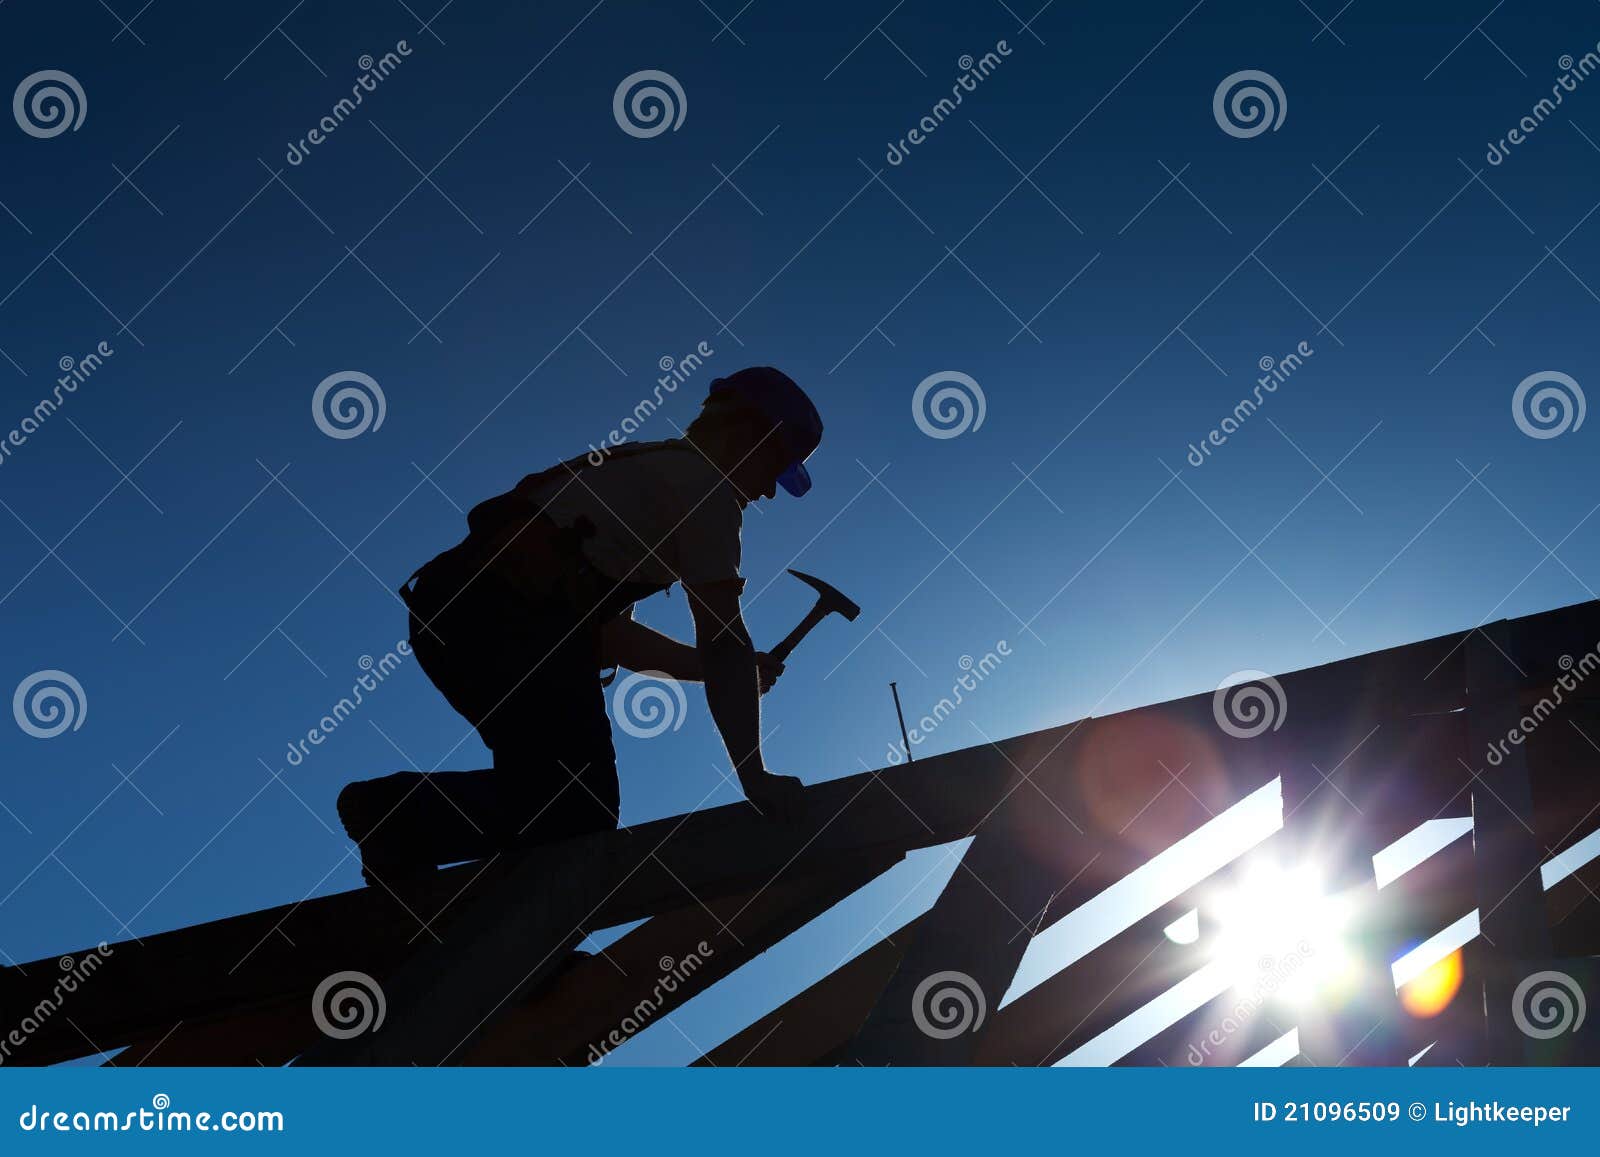 builder or carpenter working on the roof